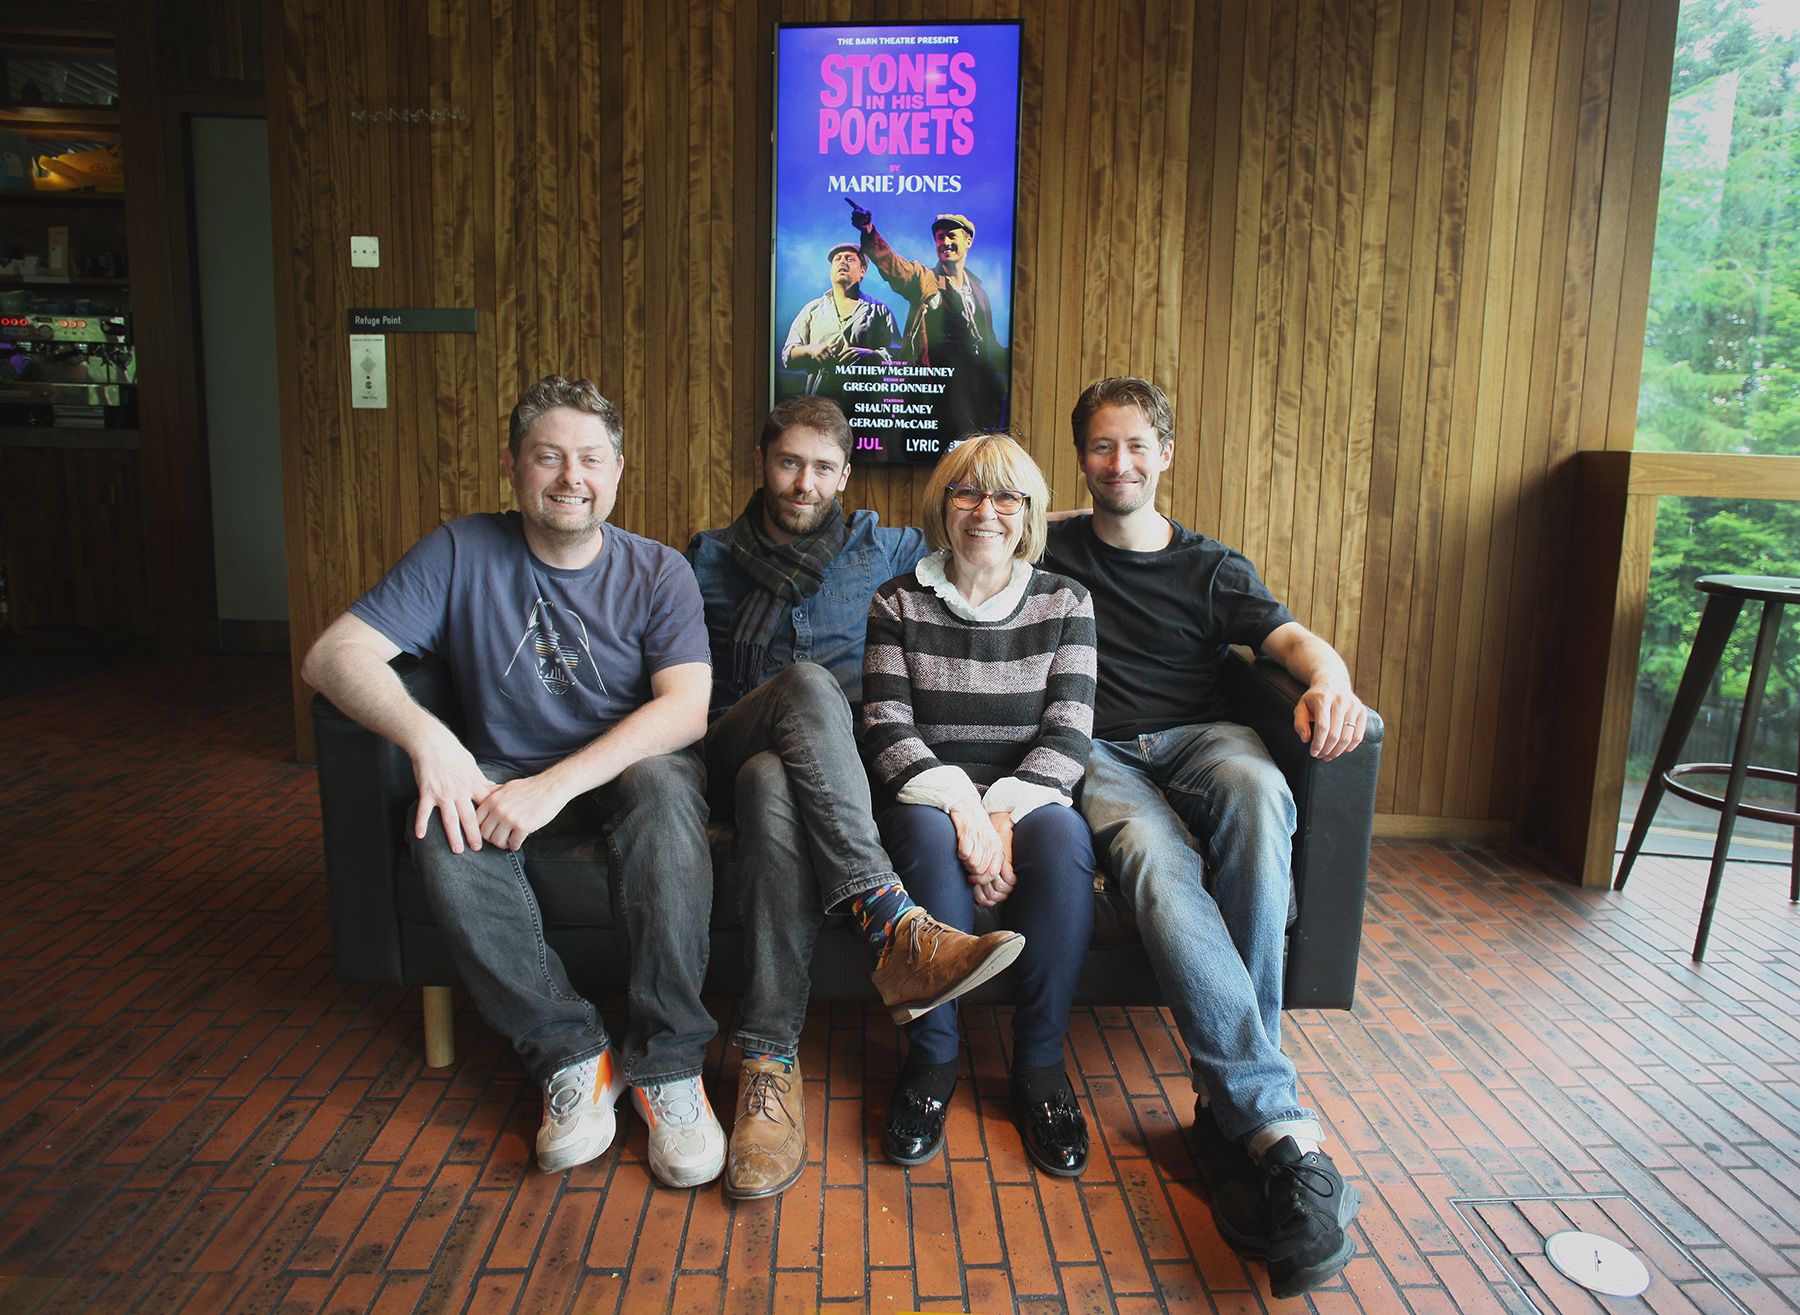 LIGHTS, CAMERA, ACTION: Gerard McCabe, Matthew McElhinney, Marie Jones and Shaun Blaney took time out of rehearsals to chat about their upcoming production